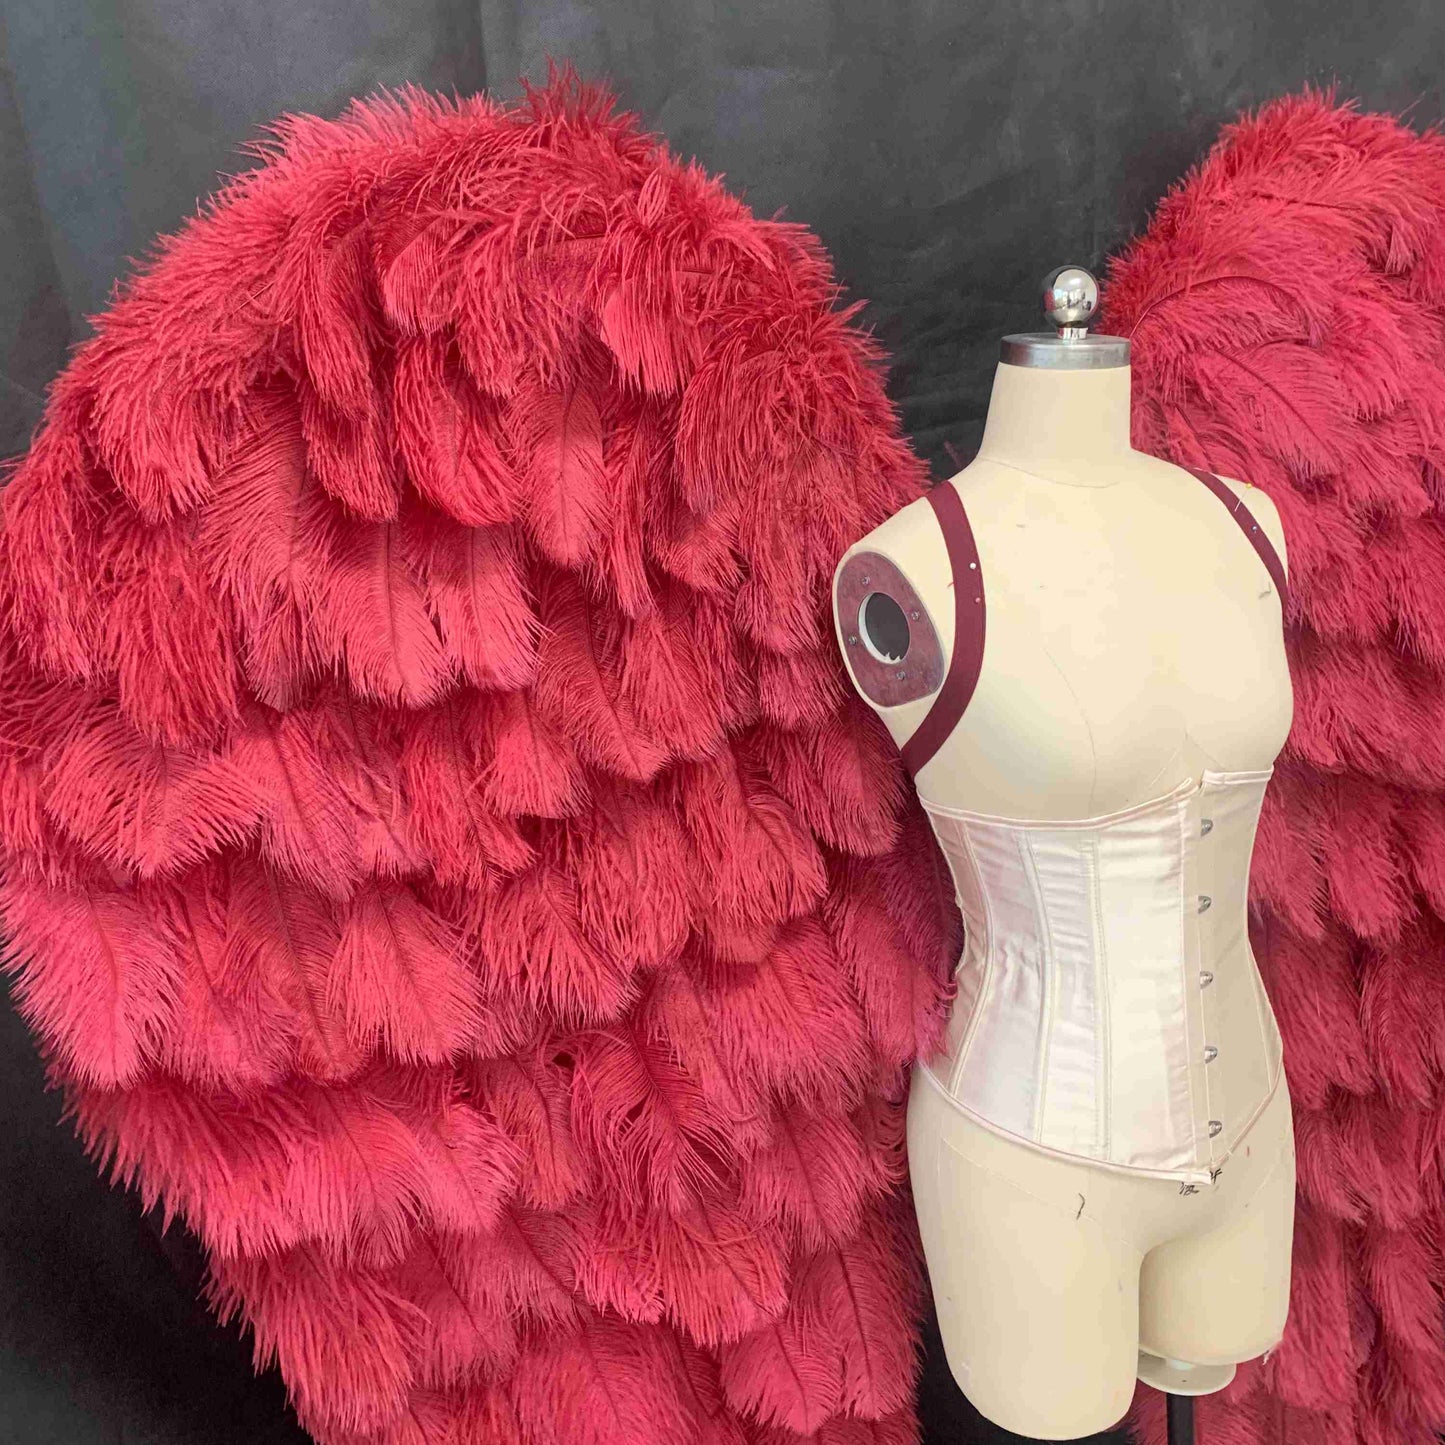 Our luxury red angel wings from the close view. Made from ostrich feathers. Wings for angel costume. Suitable for photoshoots especially for boudoirs.